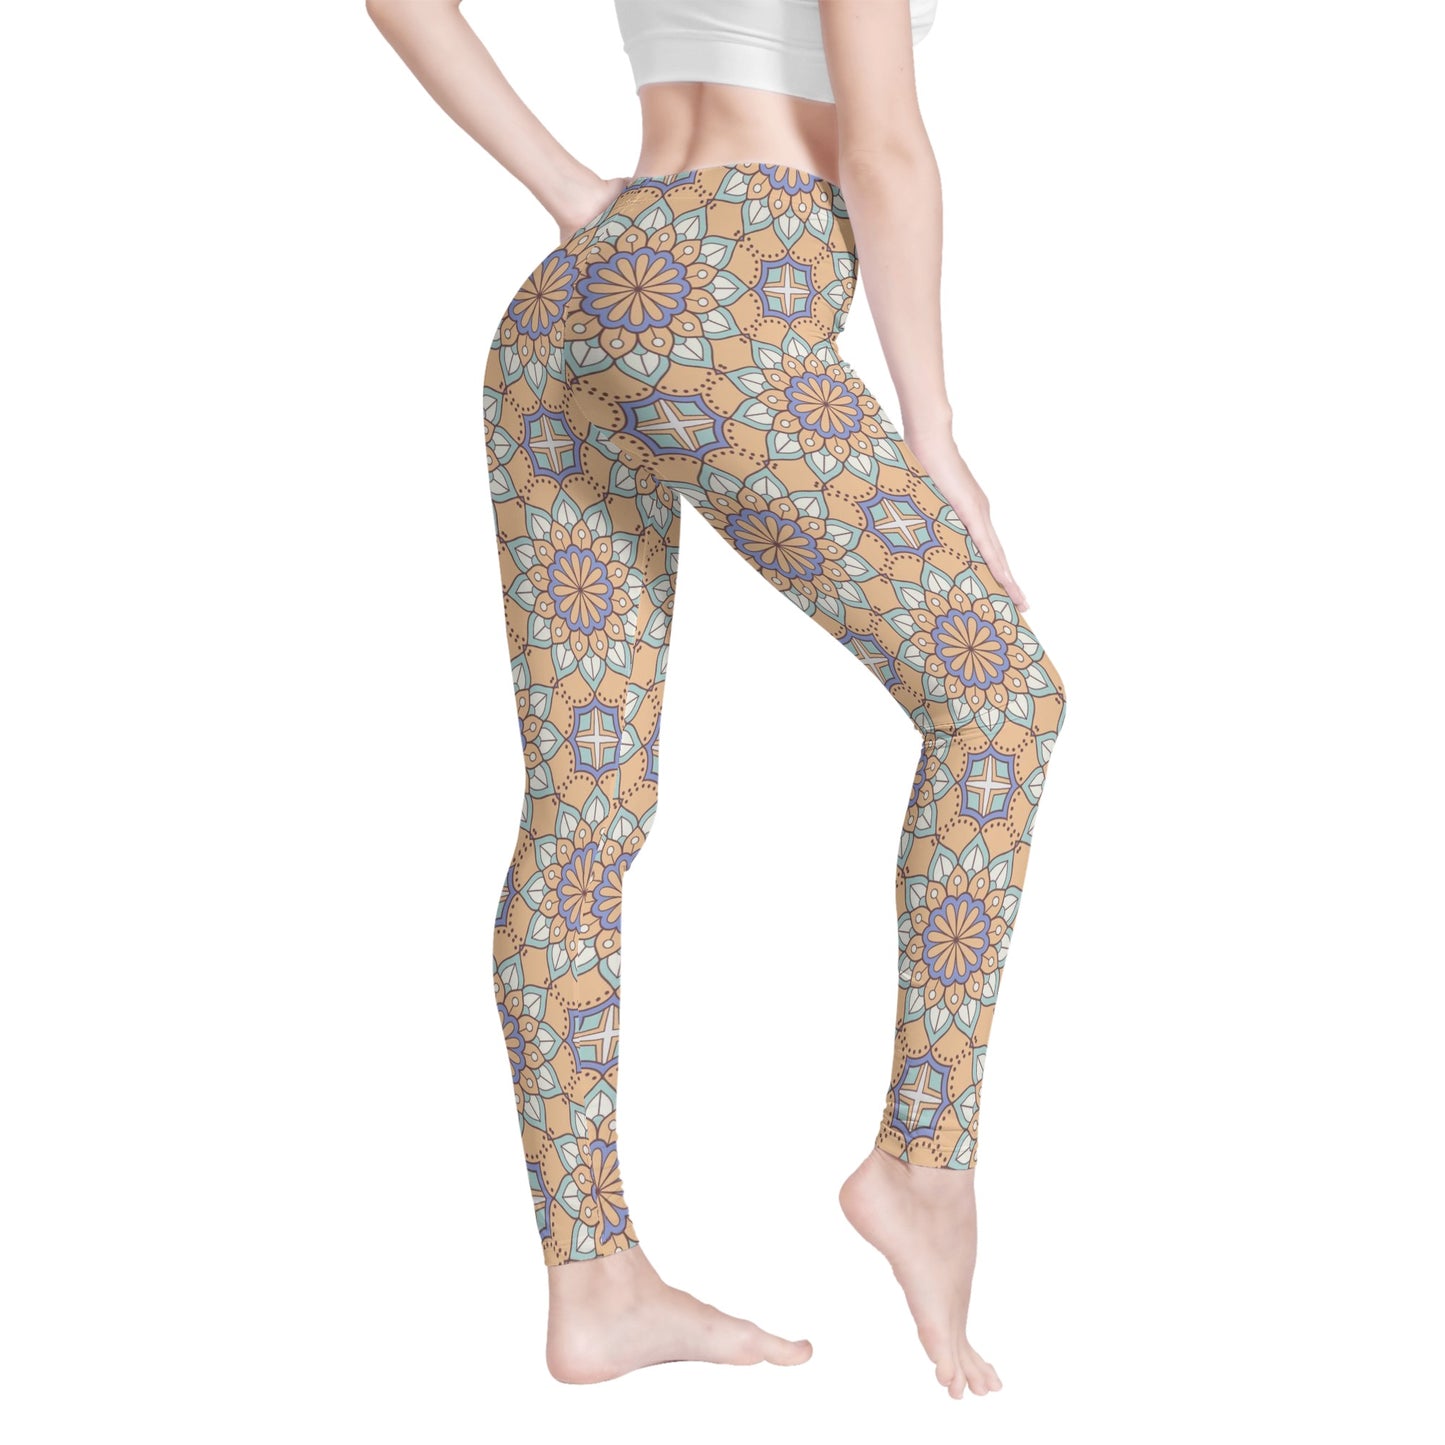 Neutral Tapestry 4 Season Womens Leggings that provide a perfect fit